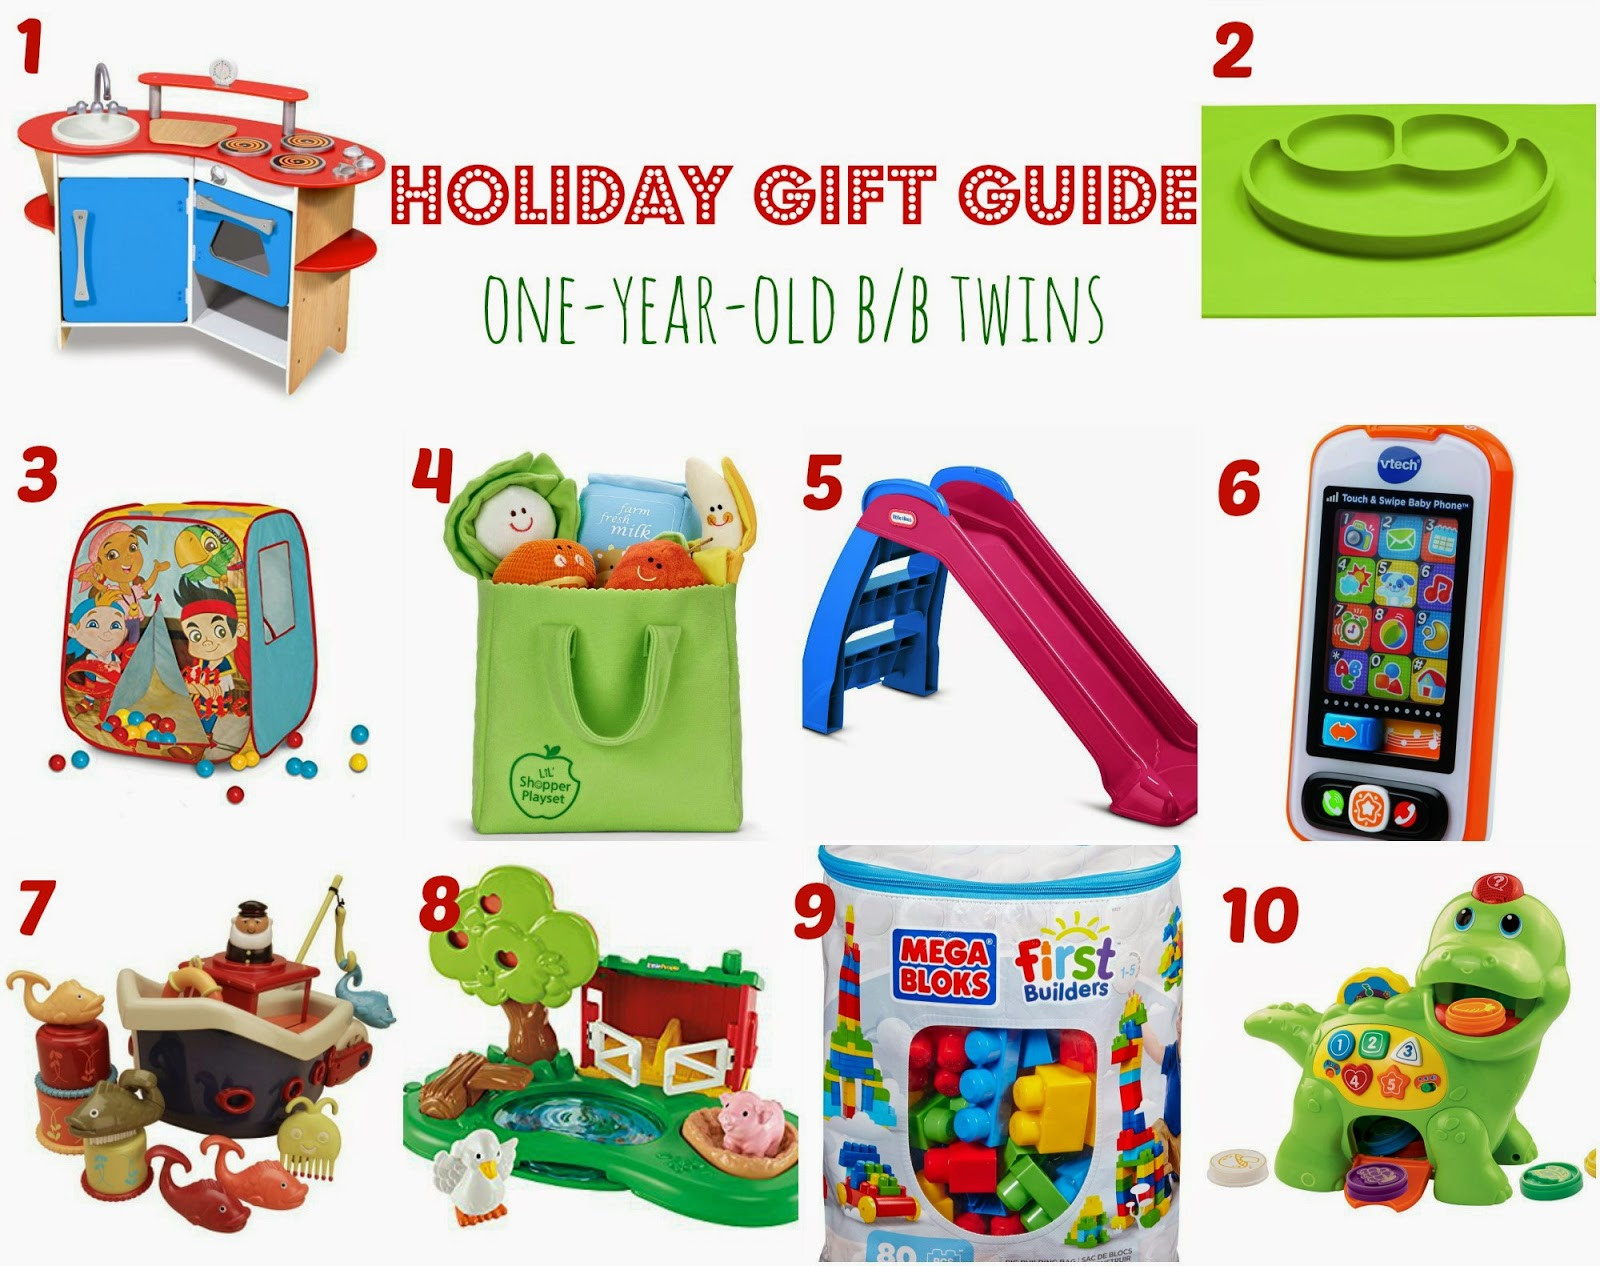 Christmas Gift Ideas For One Year Old
 Twin Talk Blog Holiday Gift Guide one year old twins